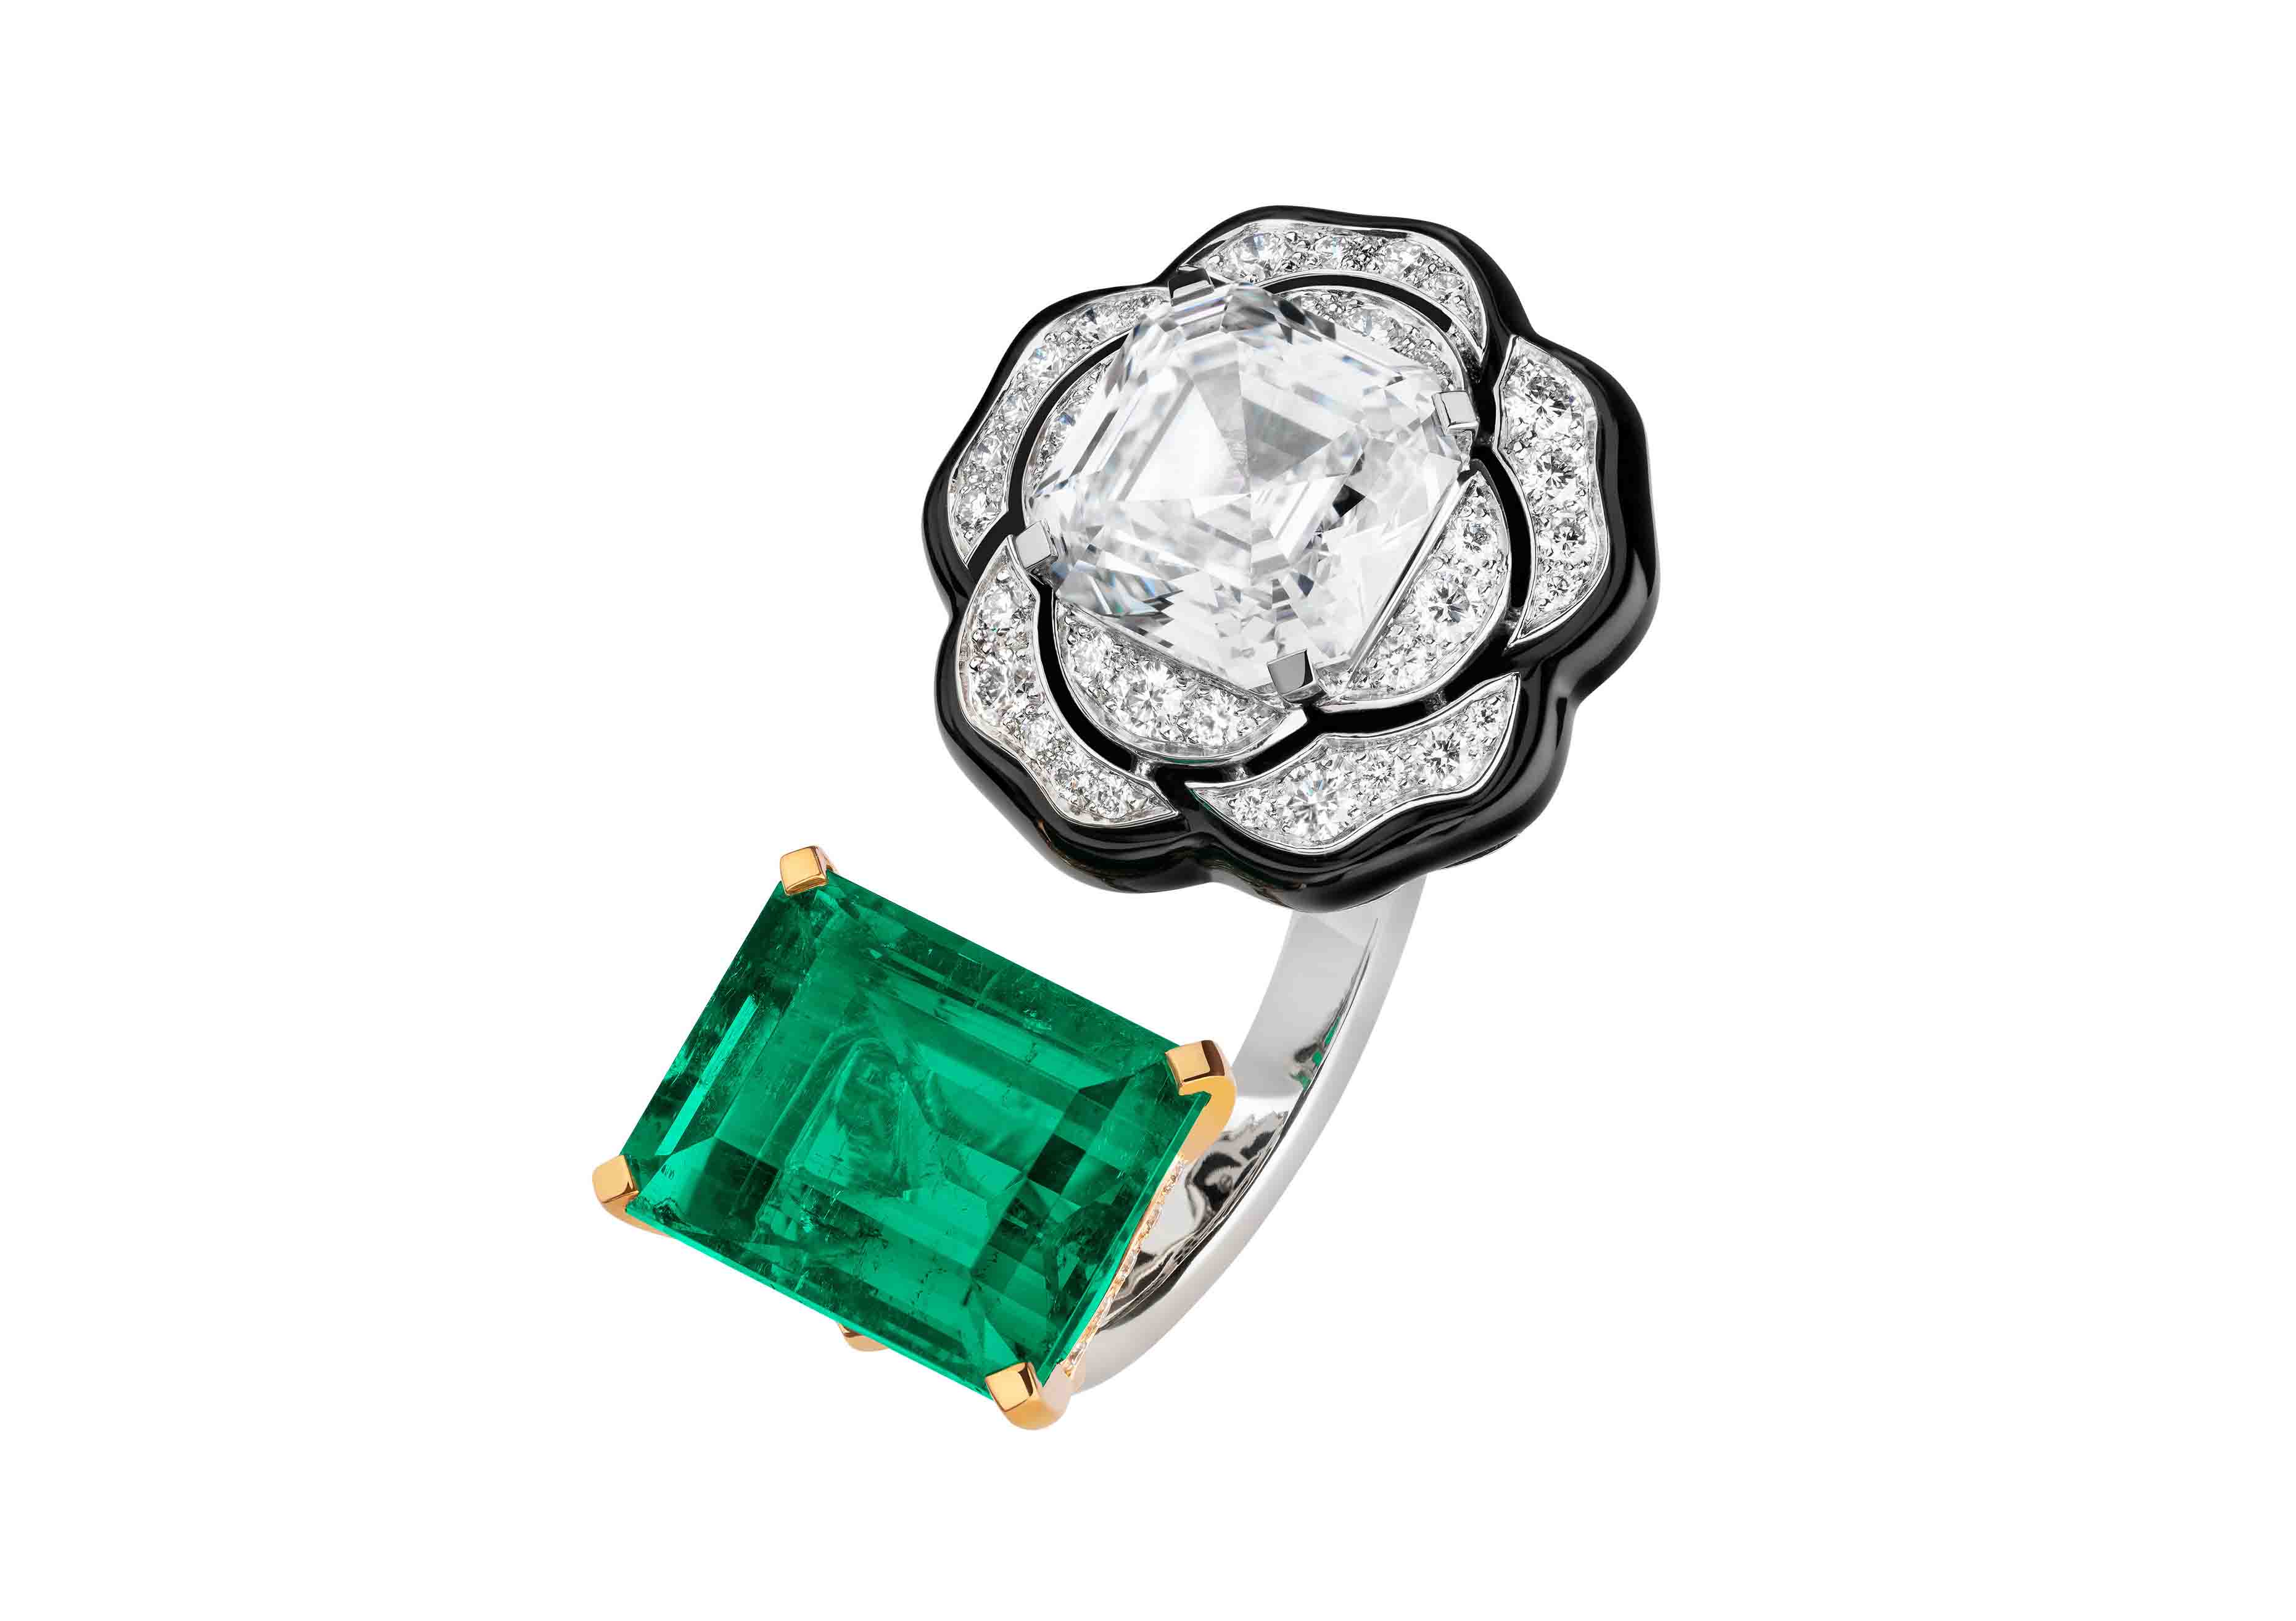 One camellia five allures Chanel takes a sole high jewelry camellia and  turns it every which way